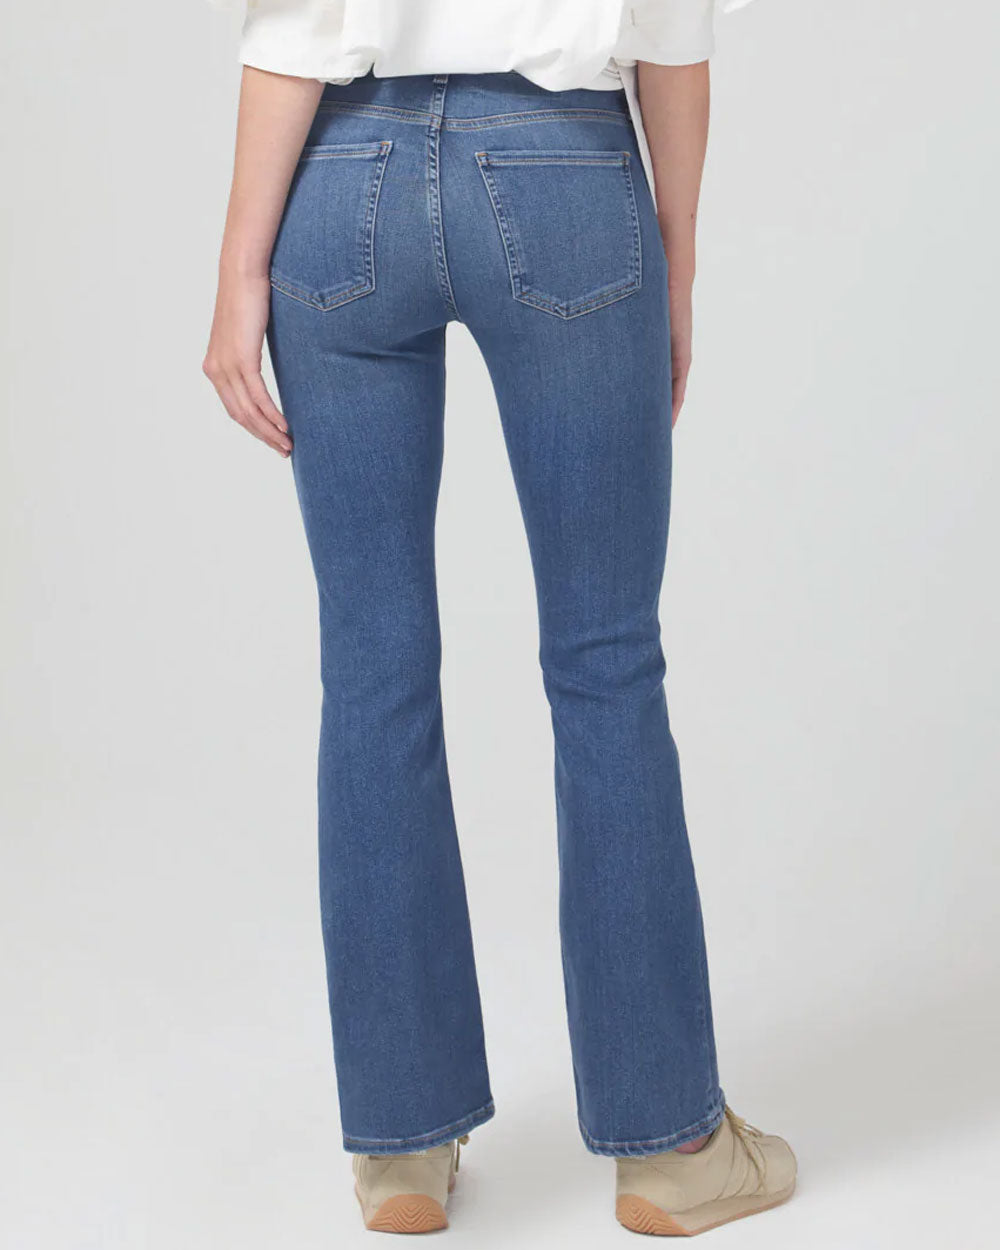 Emannuelle Low Rise Bootcut Jean in Highball